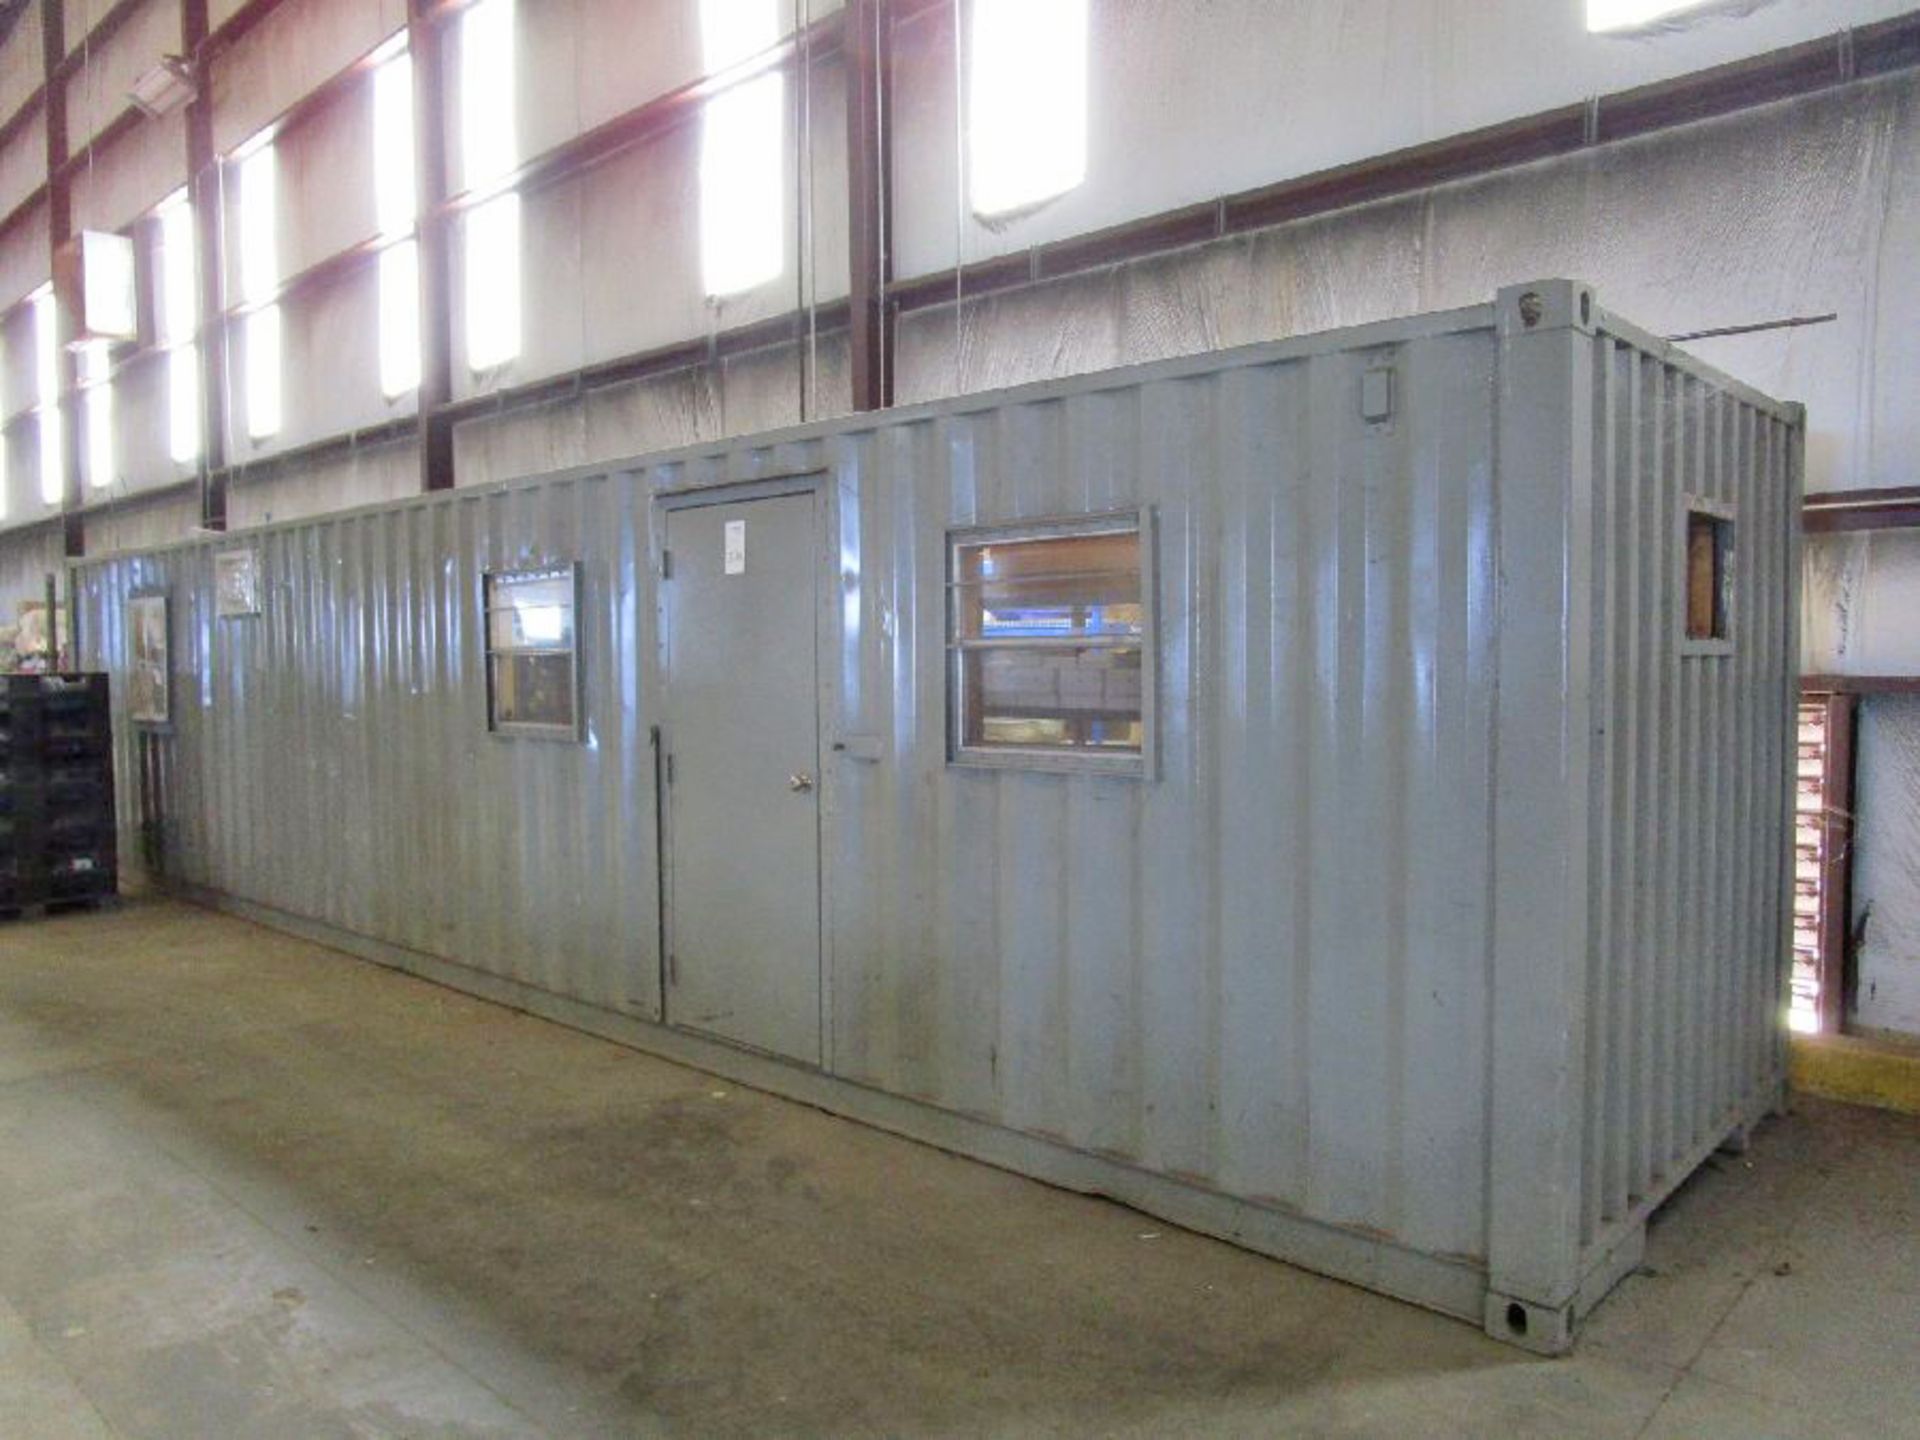 Oversea Shipping Container - Image 2 of 15